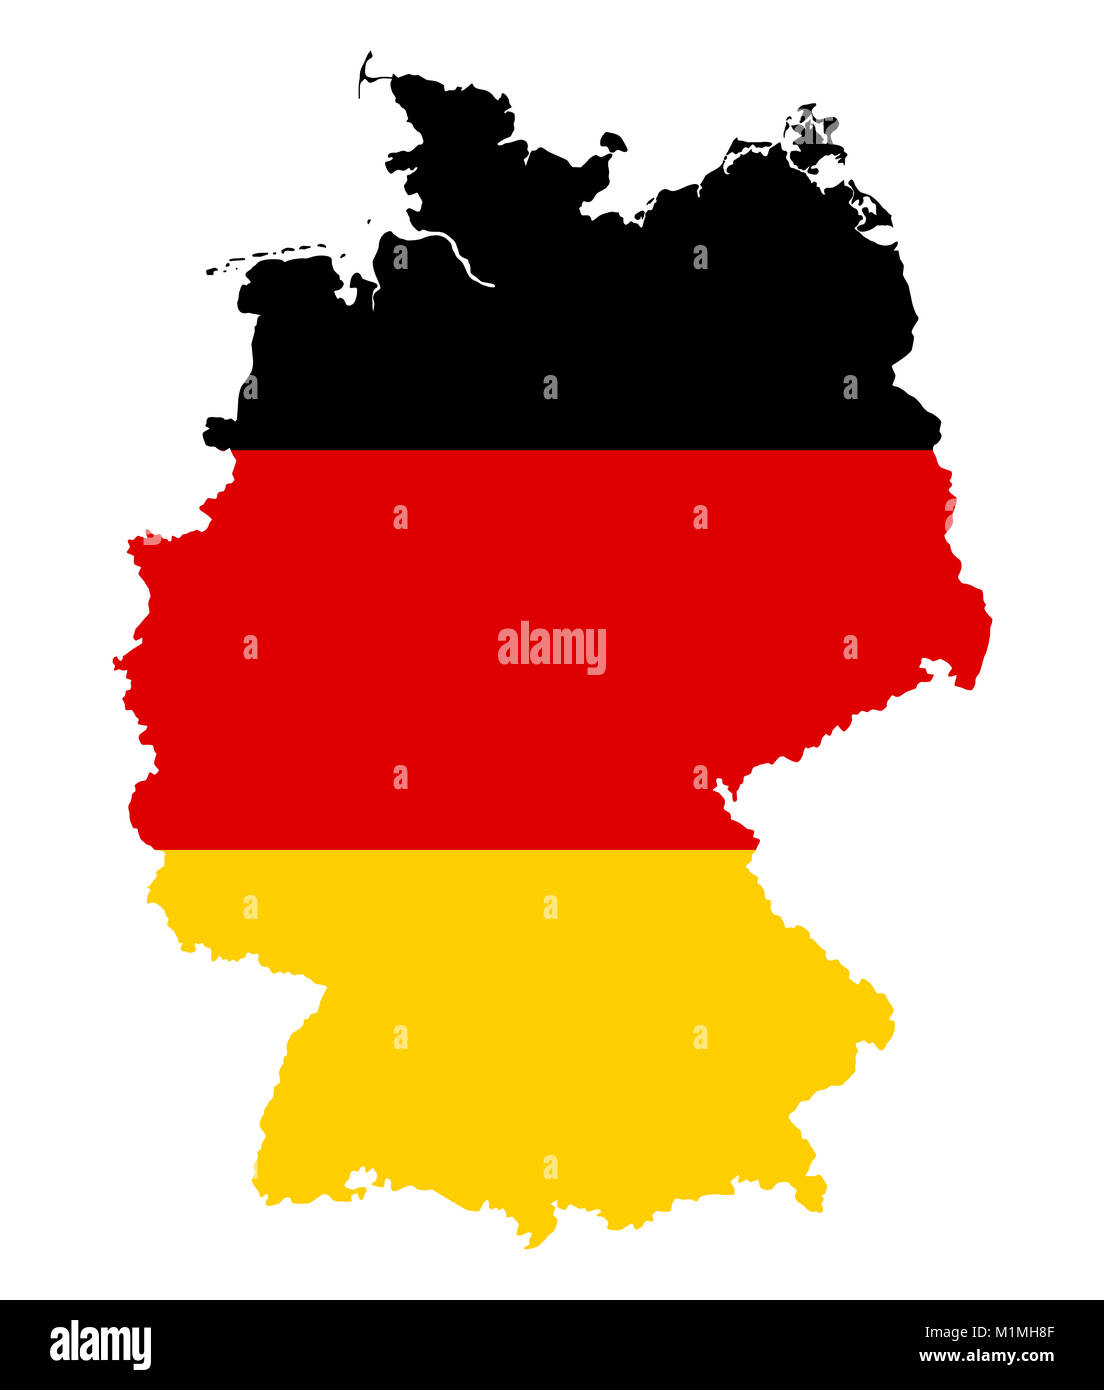 Federal Republic of Germany. Flag in silhouette of the country. Landmass and borders as outline. Colors of the nation. Black, red and yellow stripes. Stock Photo